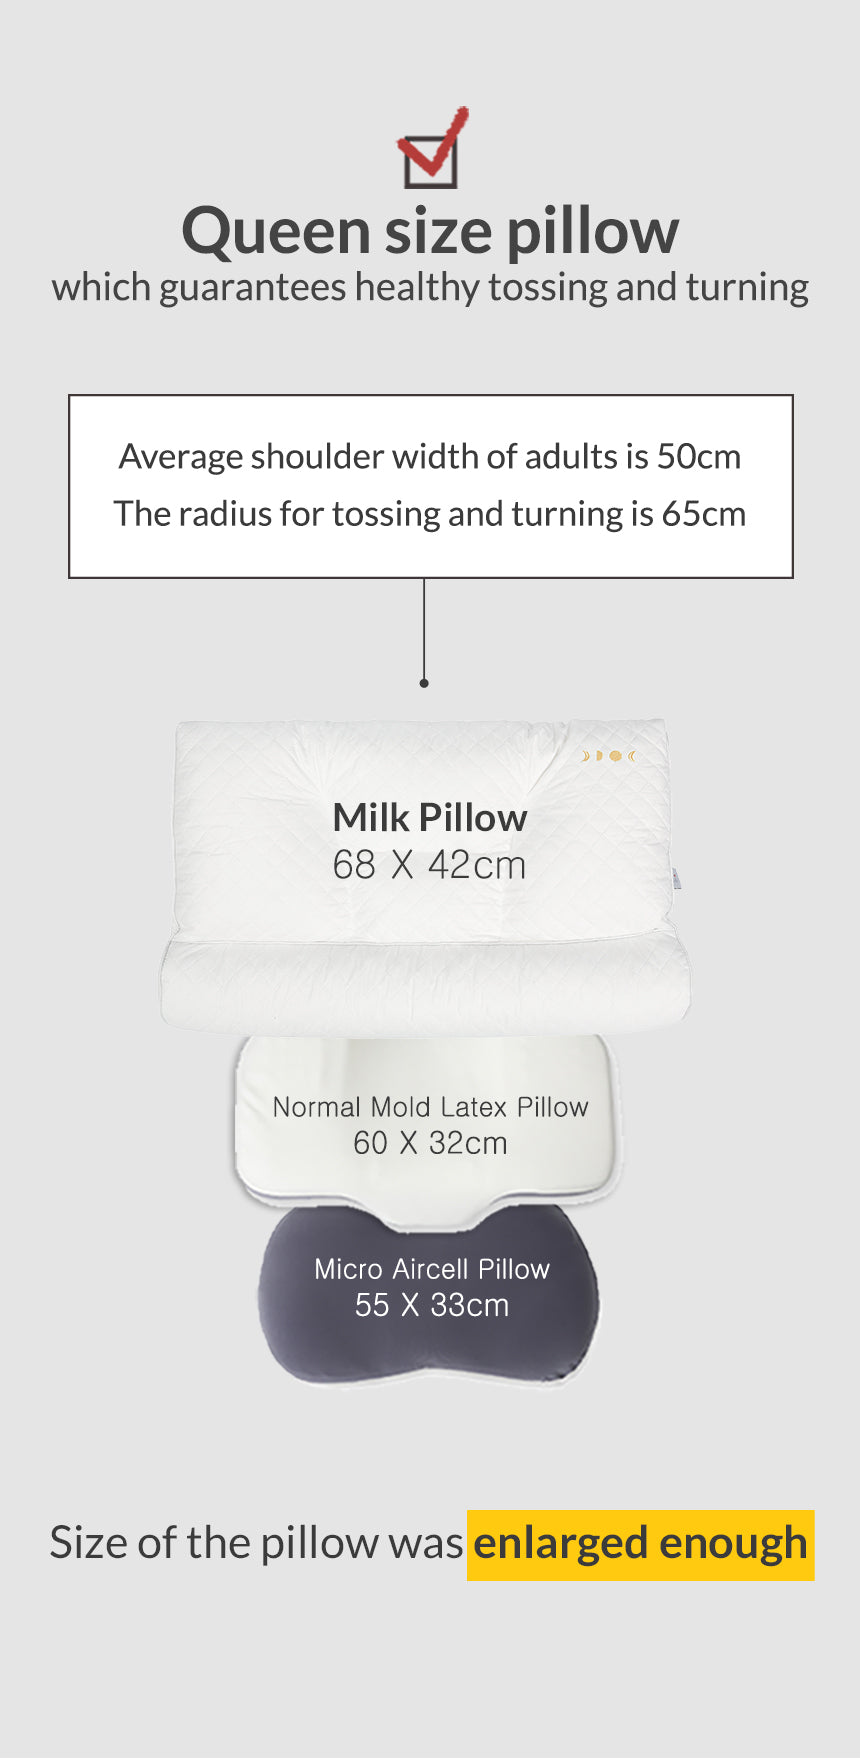 Queen size pillow which guarantees healthy tossing and turning.